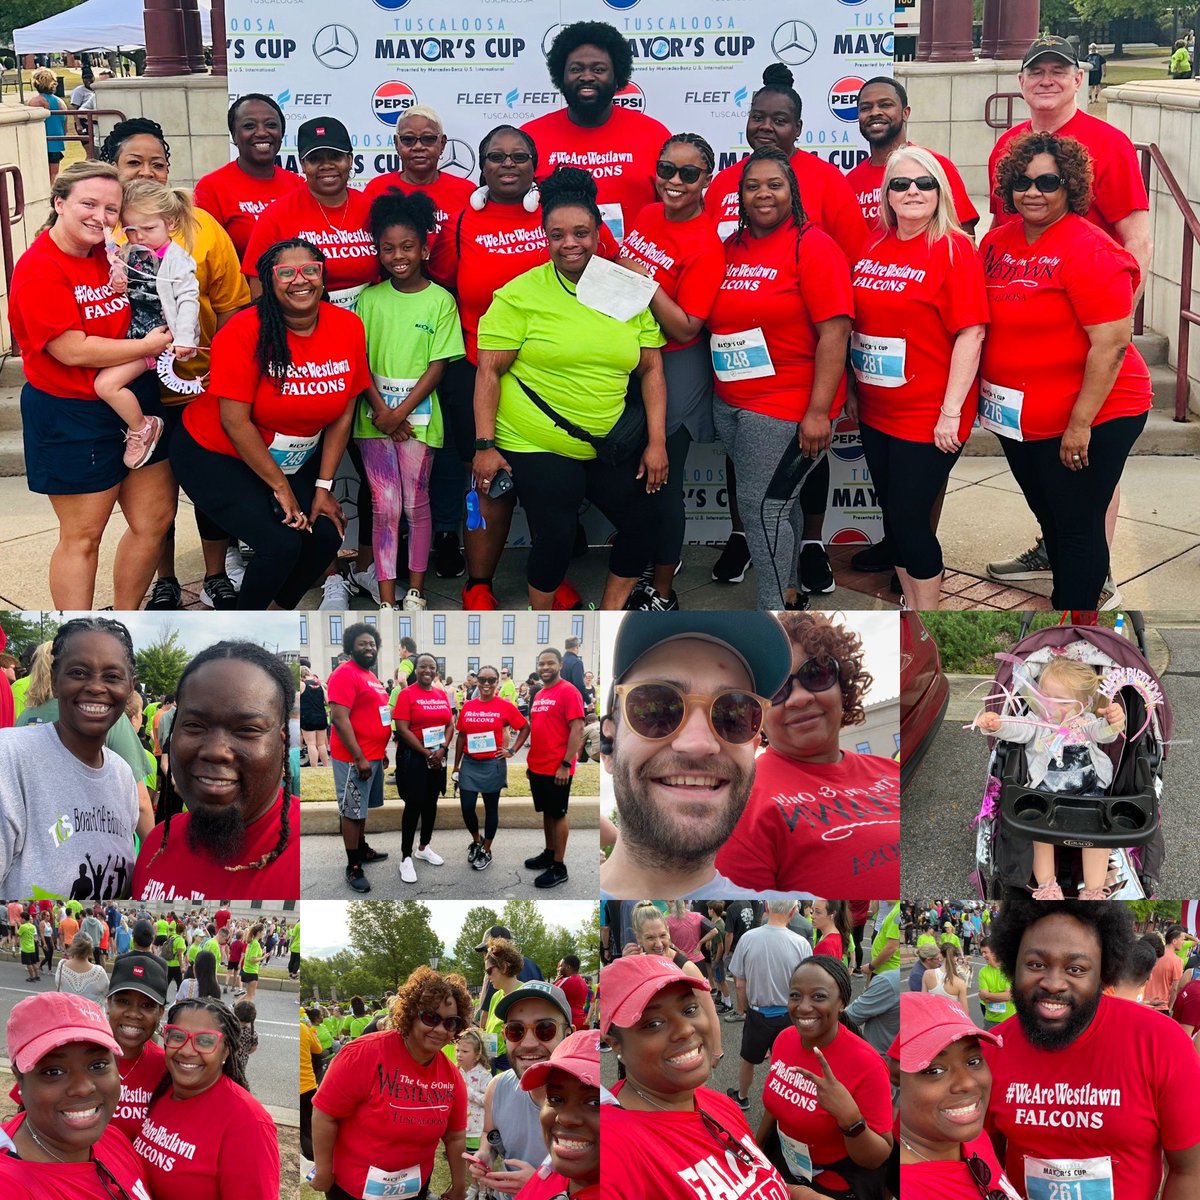 The Falcon Family participated in the annual #TuscaloosaMayorsCup this morning hosted by Mayor @WaltMaddox and the @tuscaloosacity! #WestlawnTCS #TCSLearns #FalconPride #AmazingtotheCore #FalconStrong @TCSBoardofEd